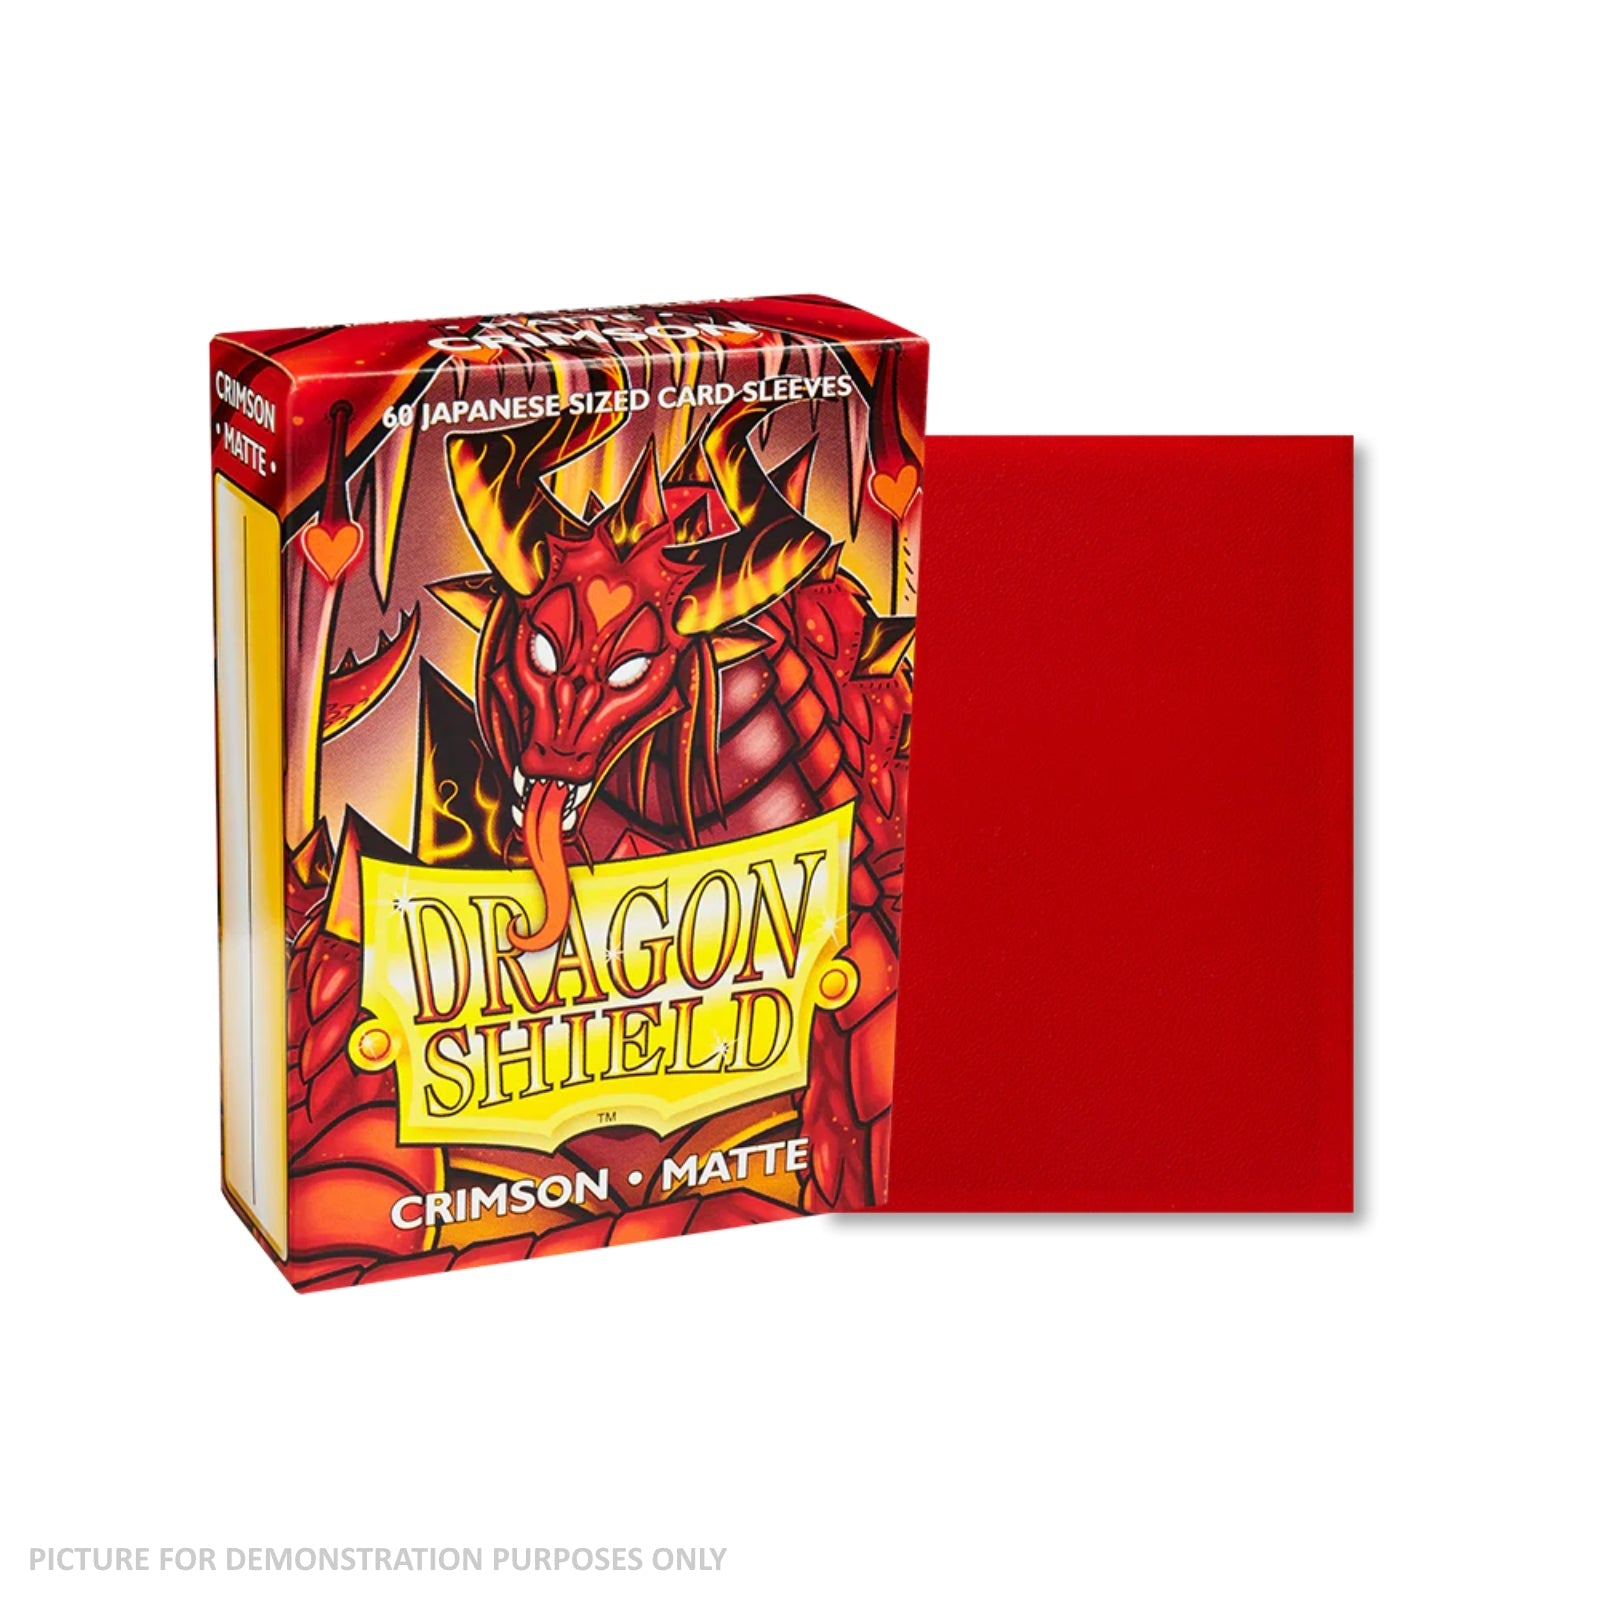 Dragon Shield 60 Japanese Size Card Sleeves - Matte Crimson – Online Coins  and Collectables